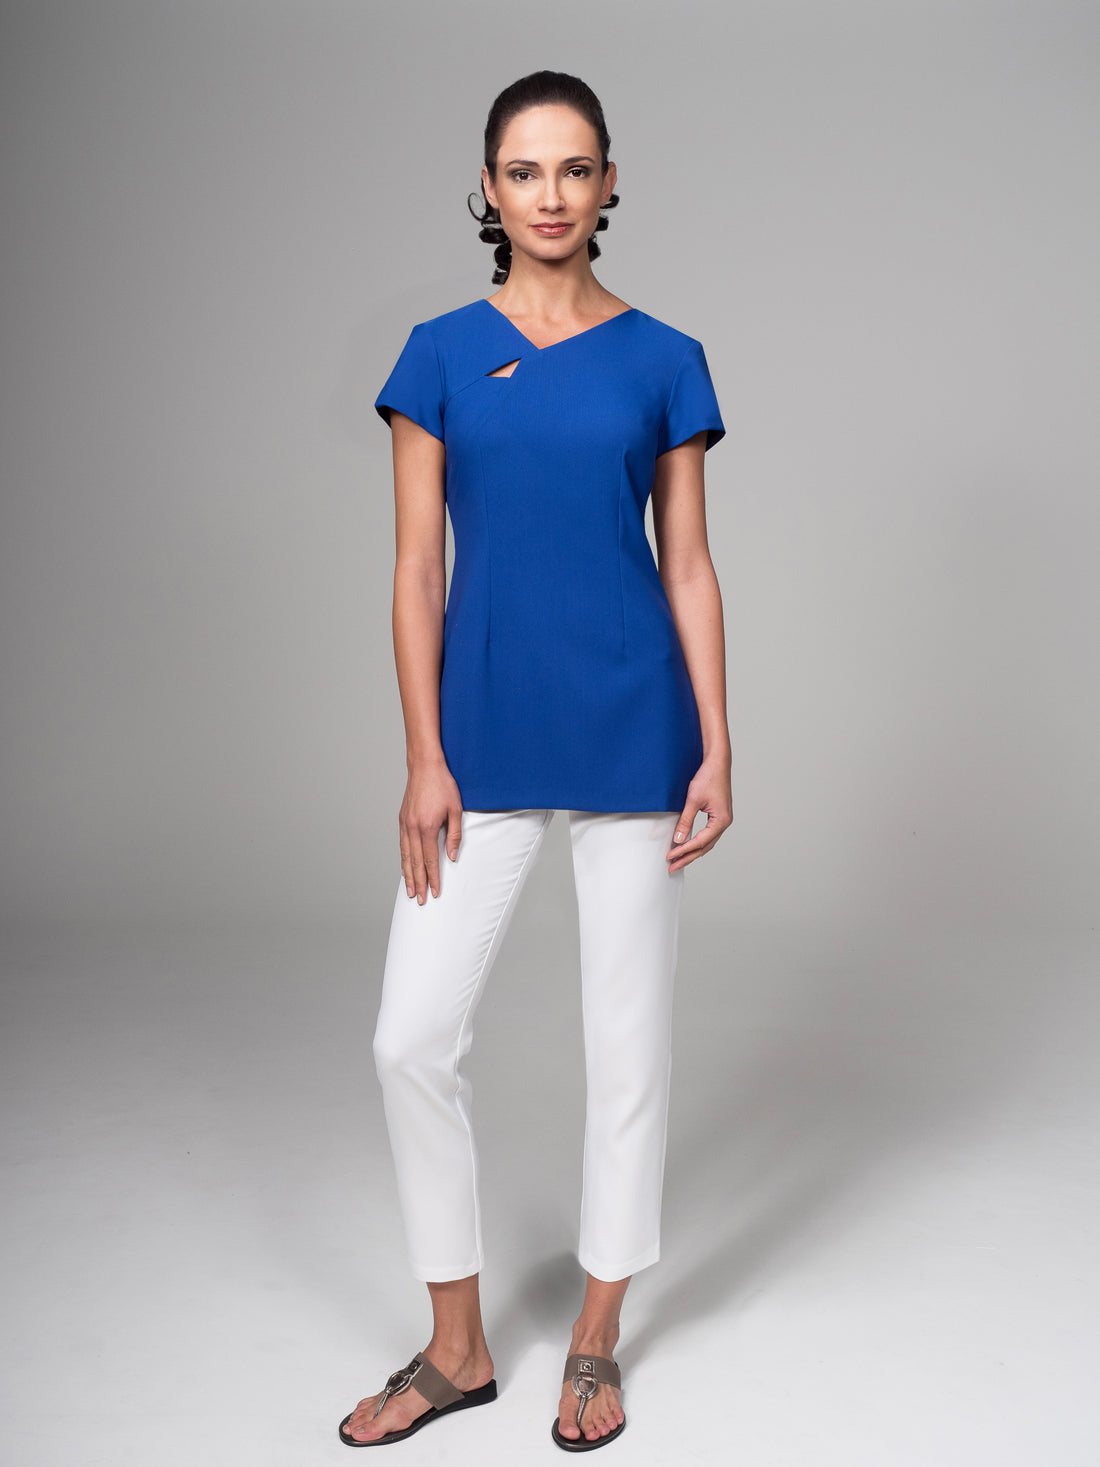 PS404 - Diamond Cut Out Tunic in Pro Stretch